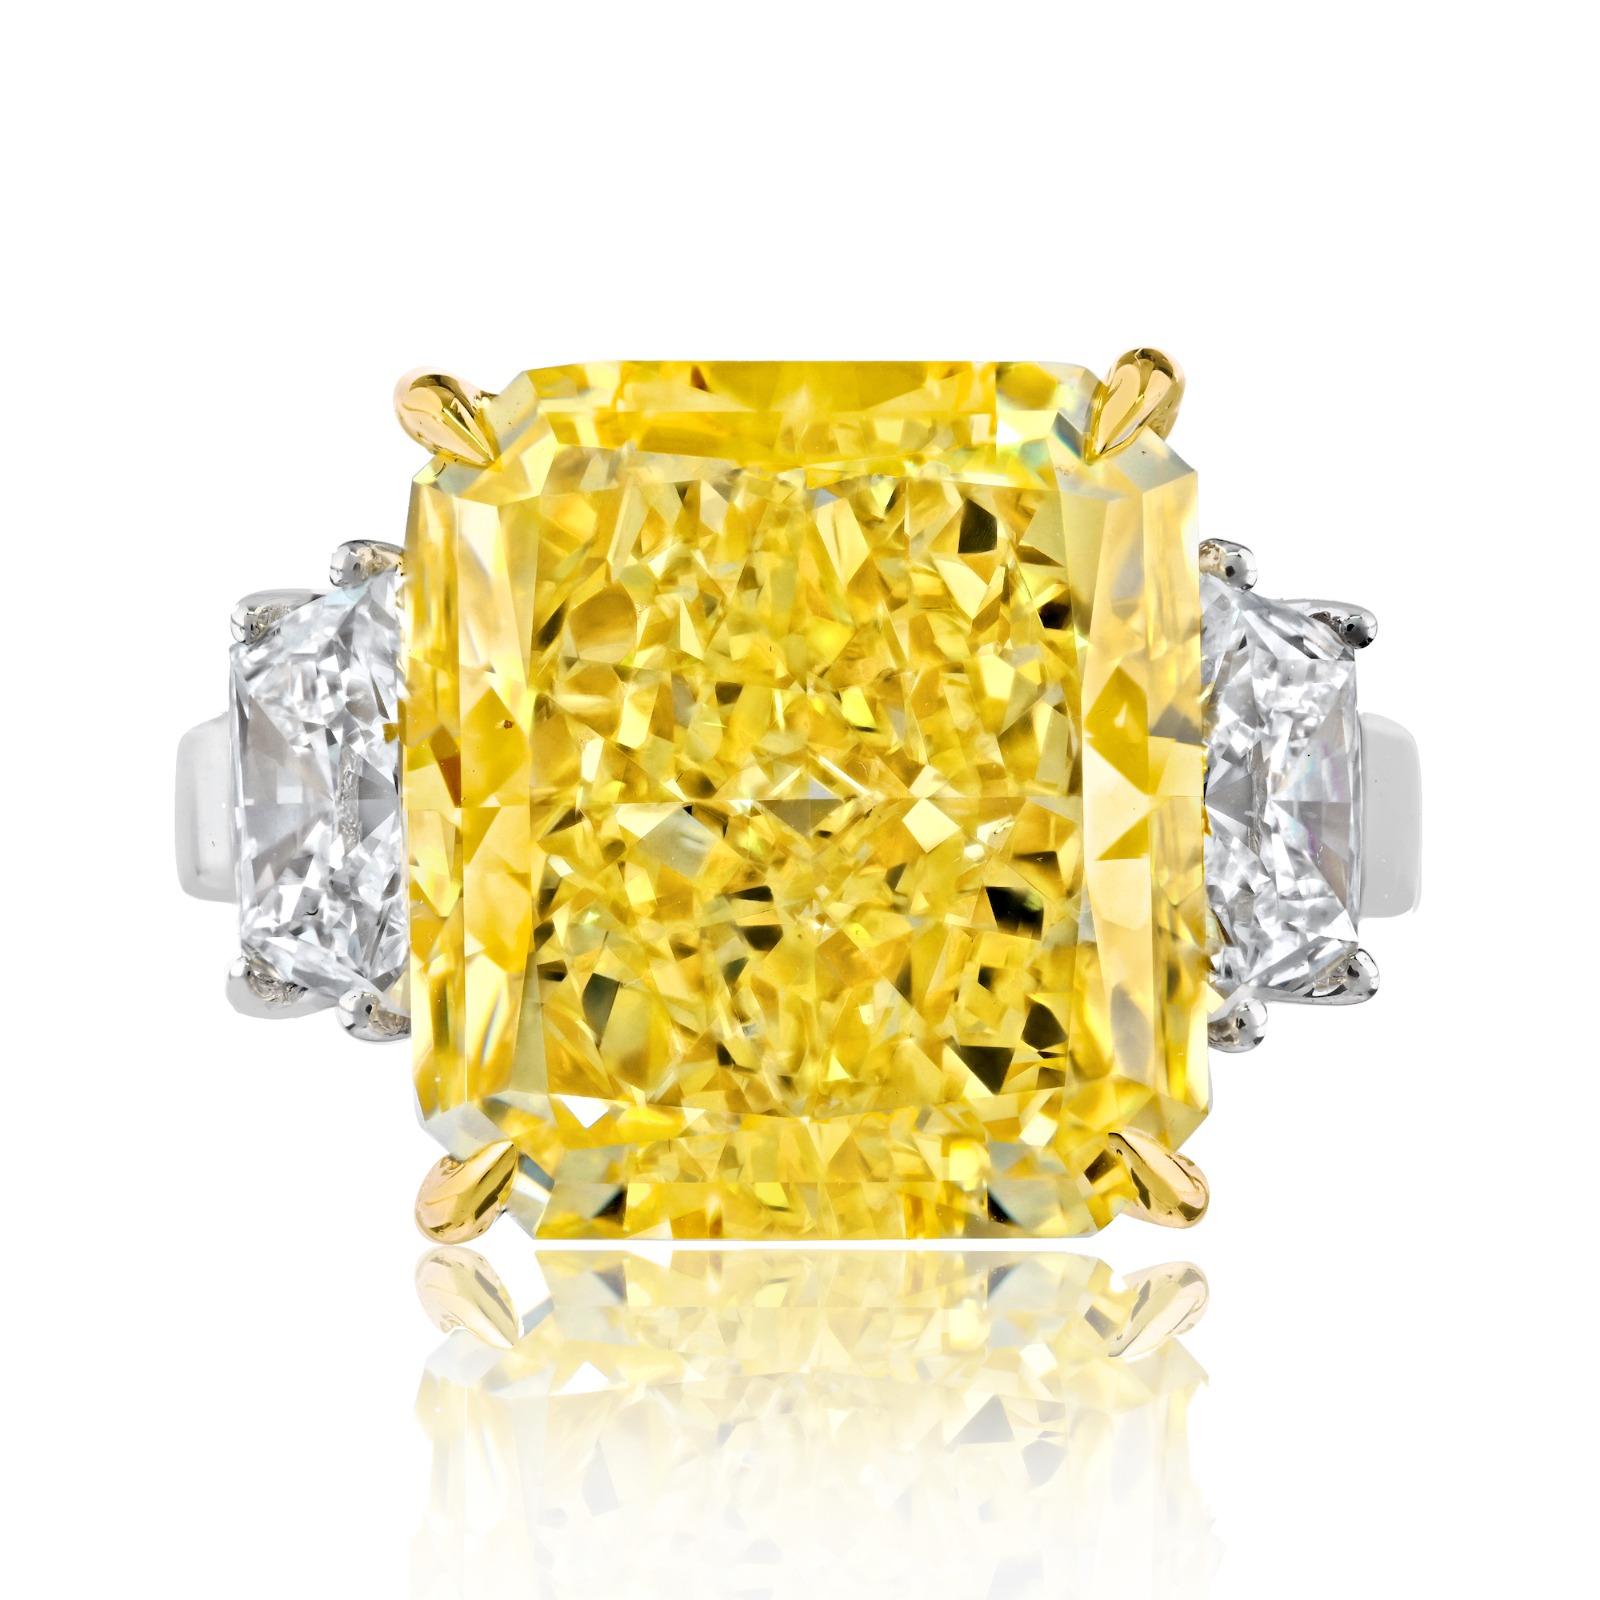 This diamond ring is truly an exceptional piece of jewelry, featuring a very special Fancy Yellow Vivid Radiant Cut Diamond. This diamond is of a remarkable 12 carats and boasts a deep fancy yellow color. 

The ring is mounted in platinum, a metal